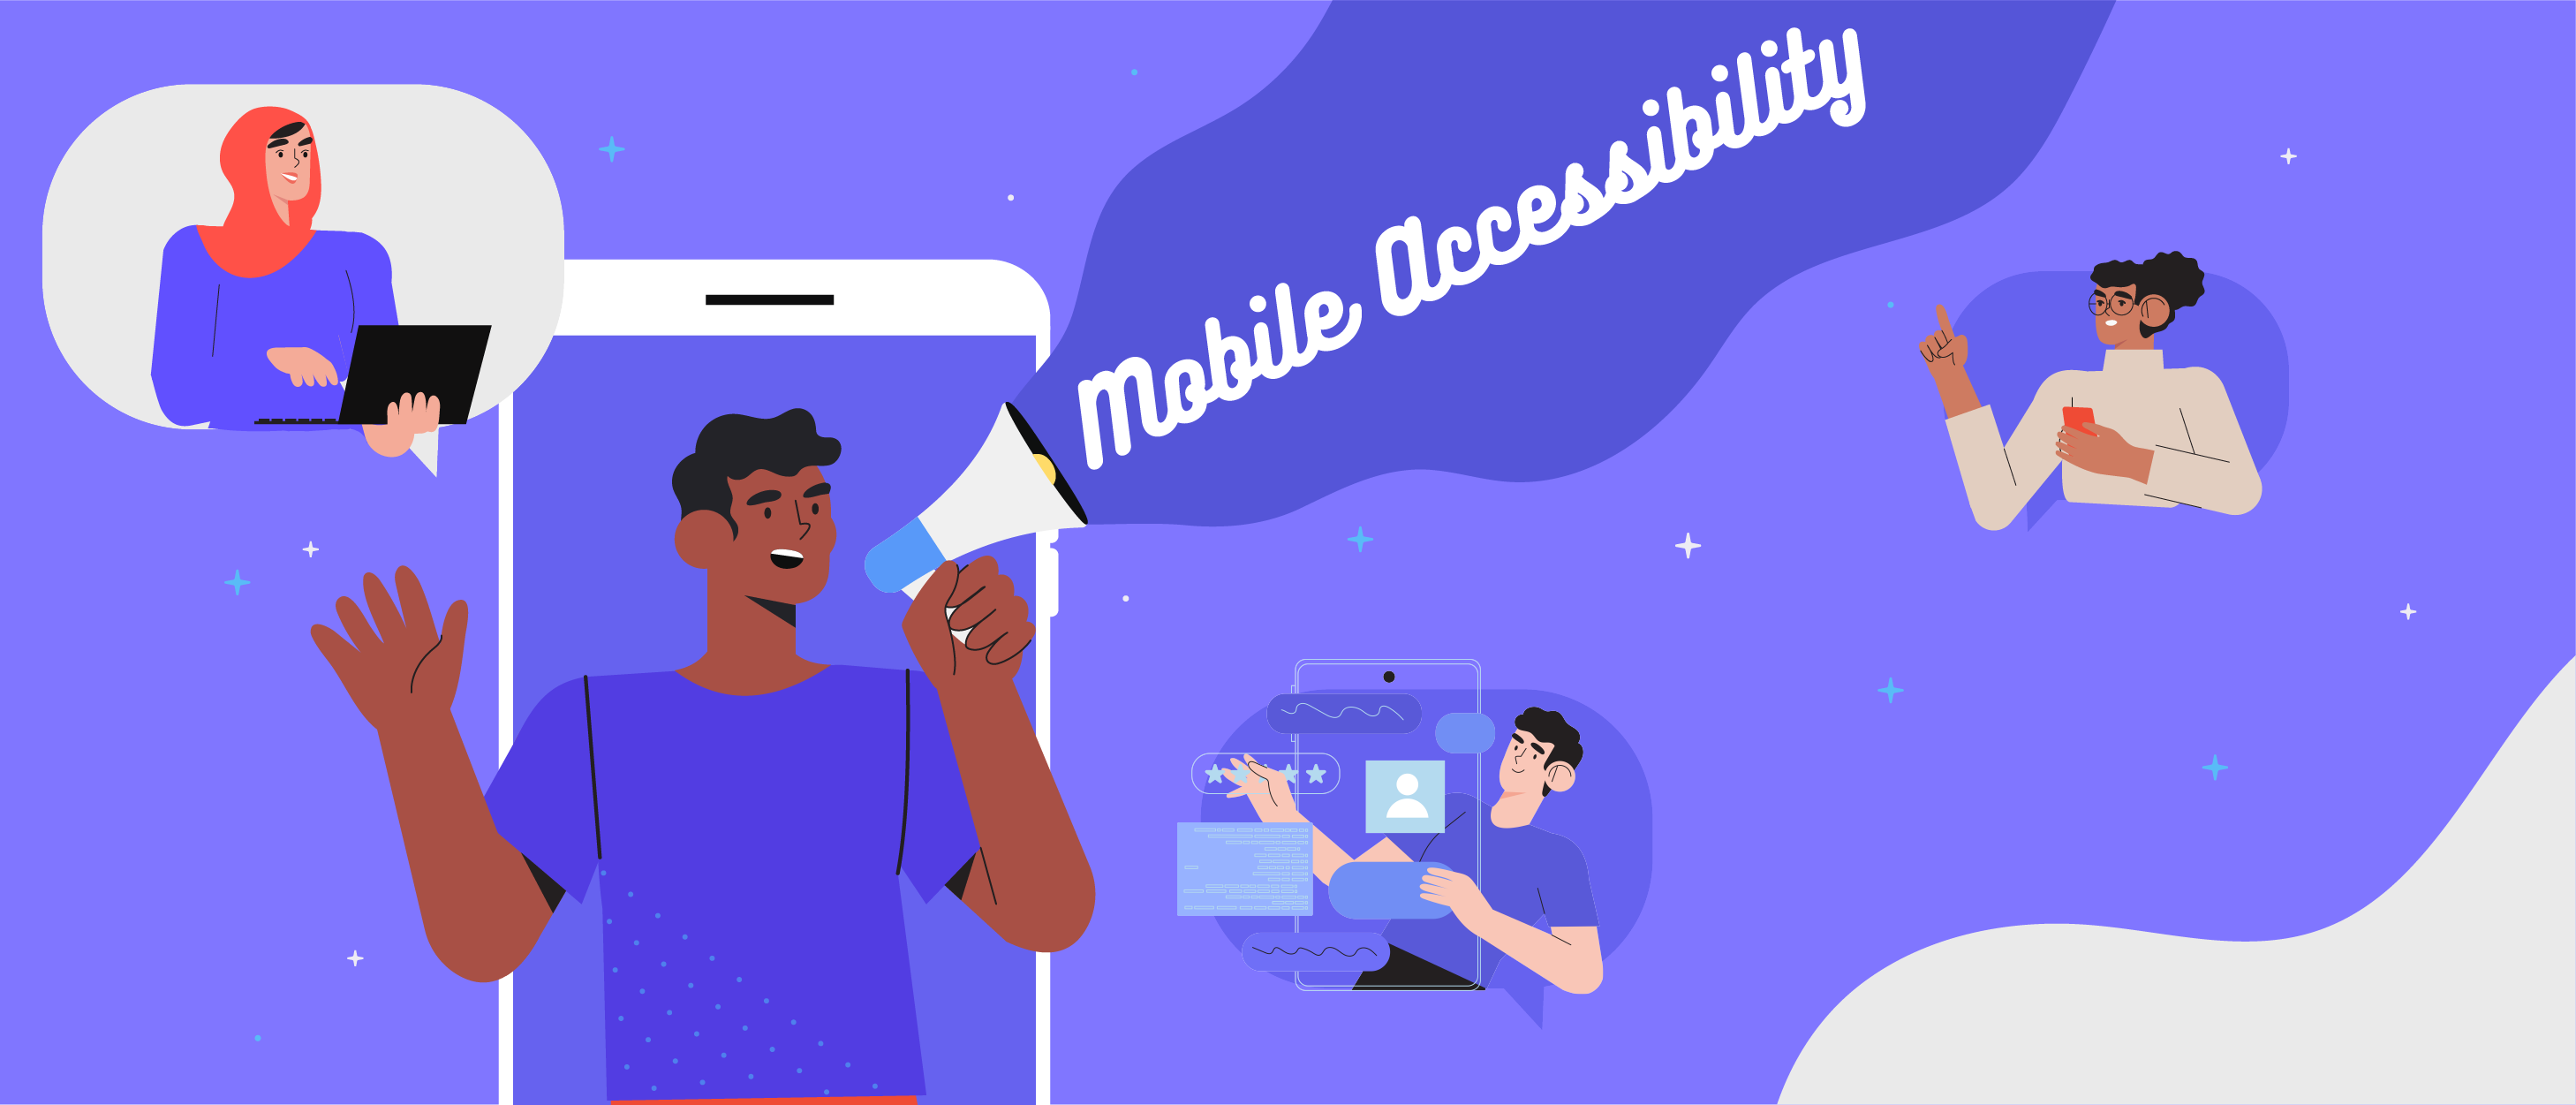 Decorative banner: person in mobile phone with a megaphone saying mobile accessibility with other mobile developers around him.